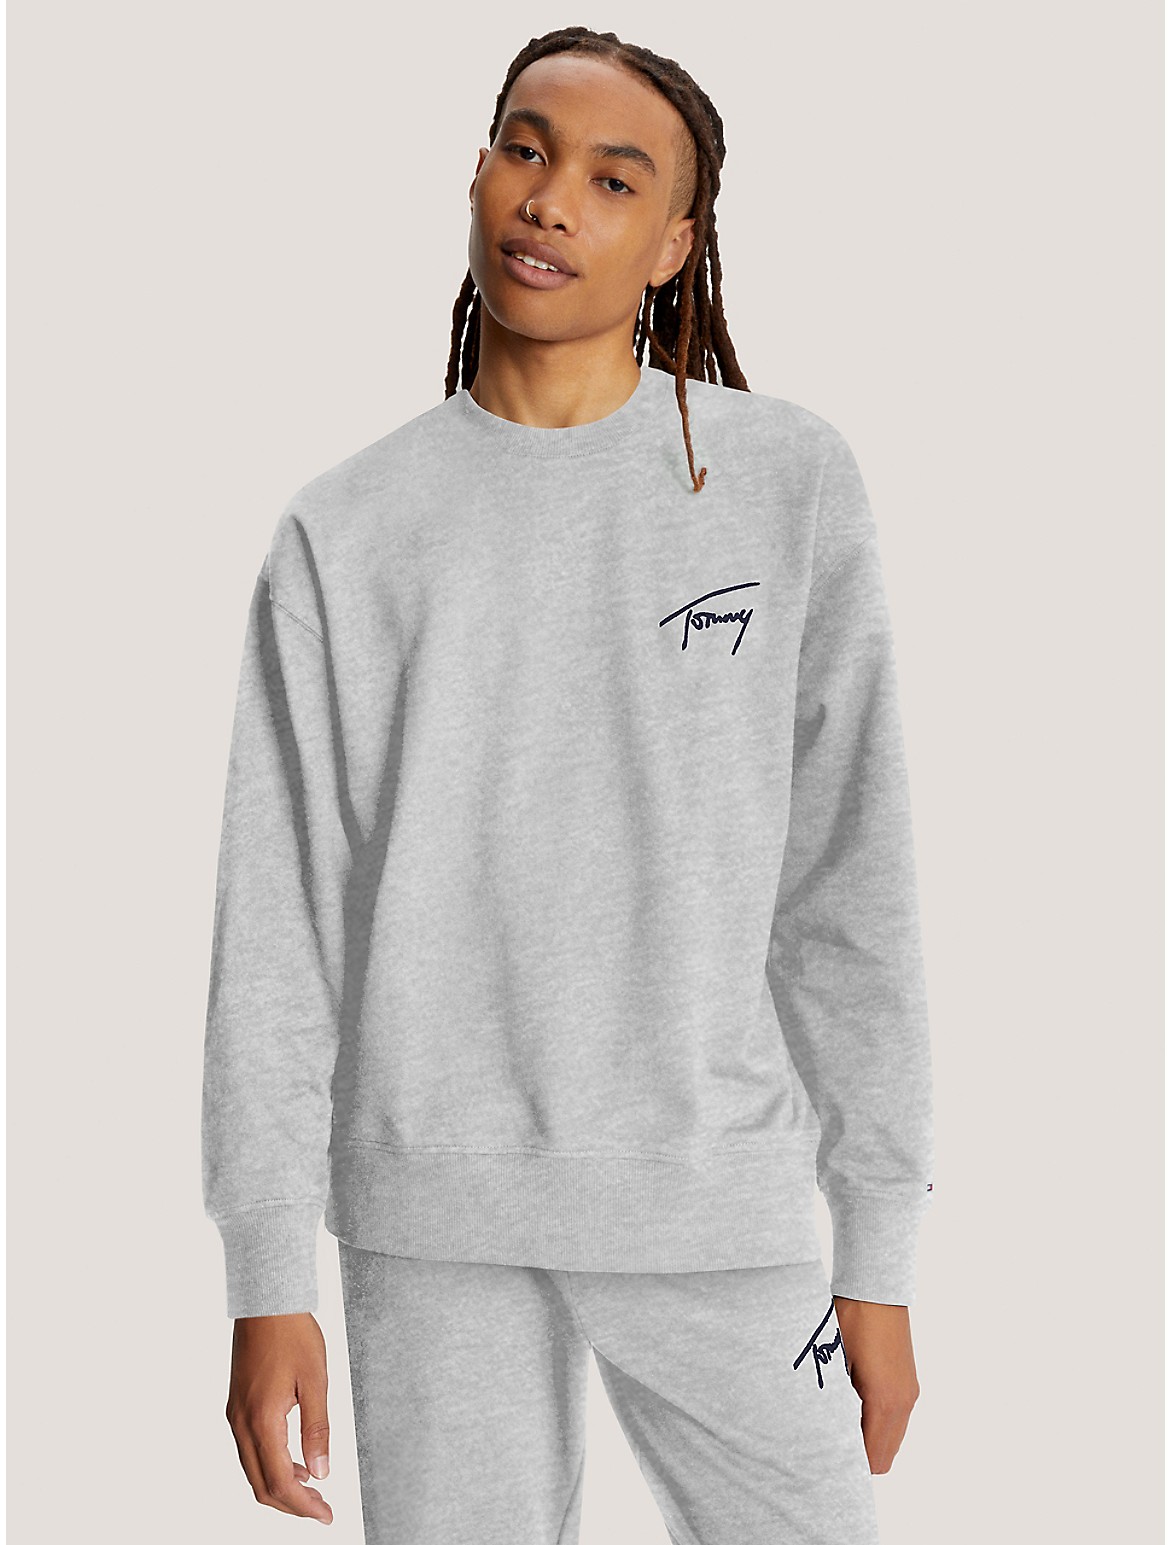 Tommy Hilfiger Men's Embroidered Signature Logo - Grey - XS